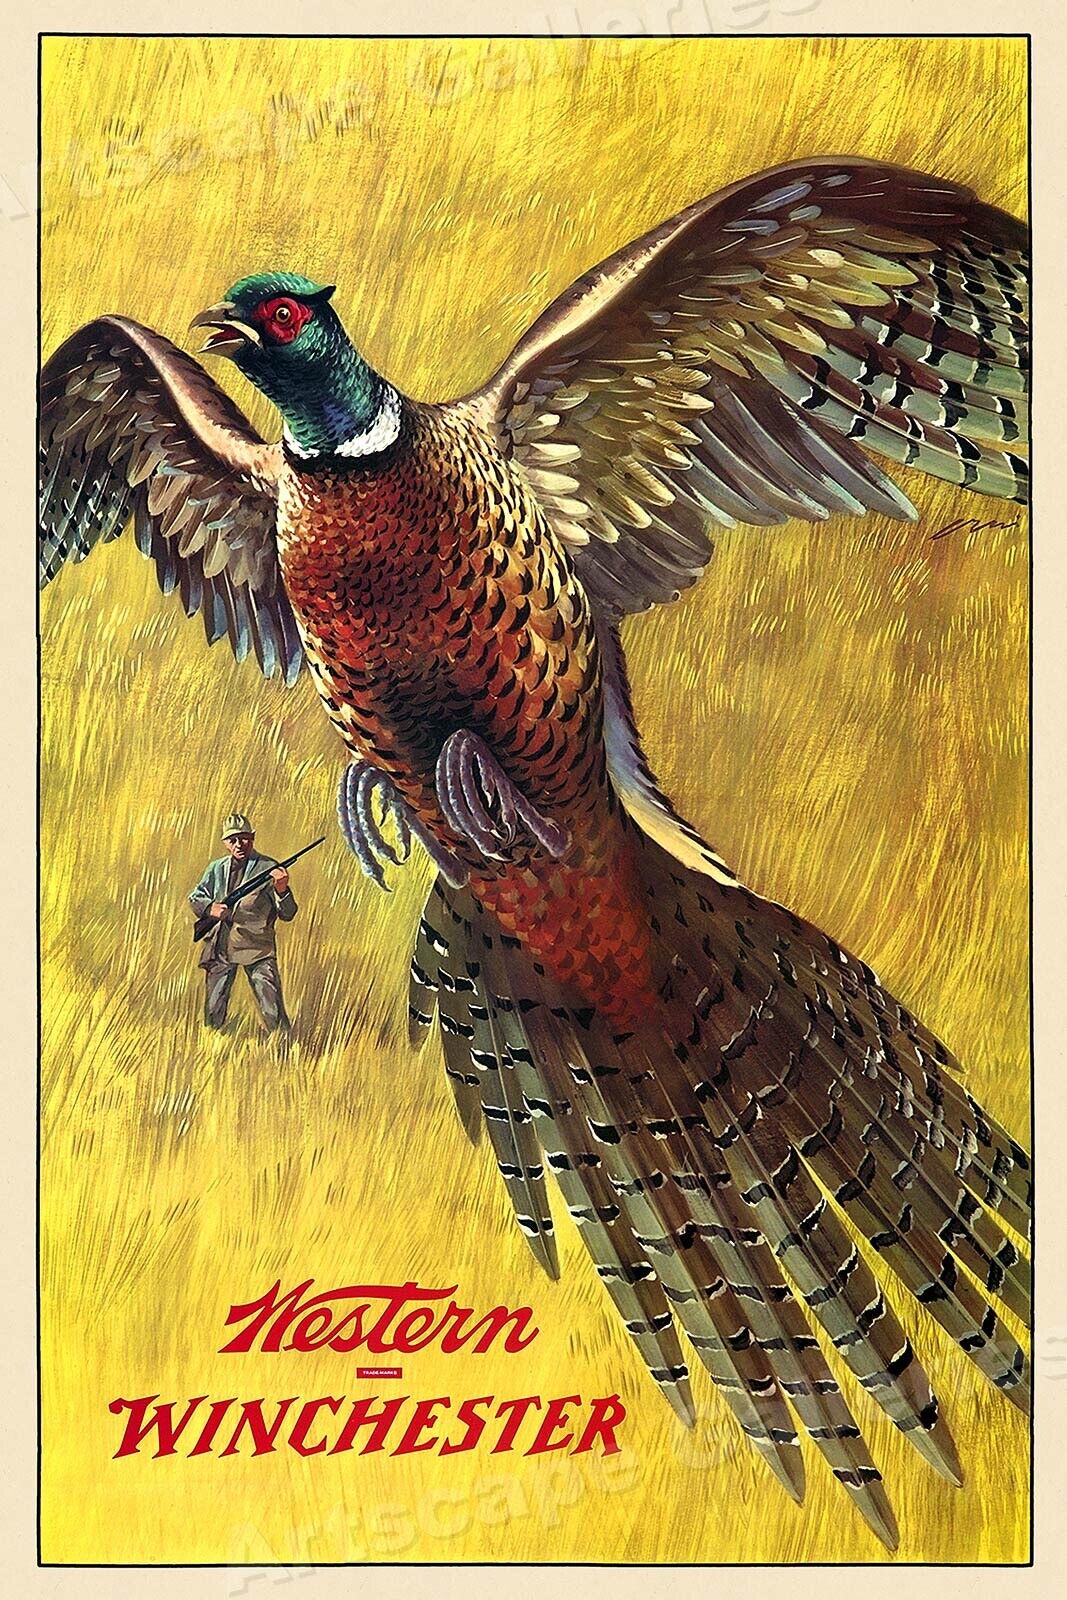 1950s Western Winchester Pheasant Hunting Vintage Style Poster - 16x24